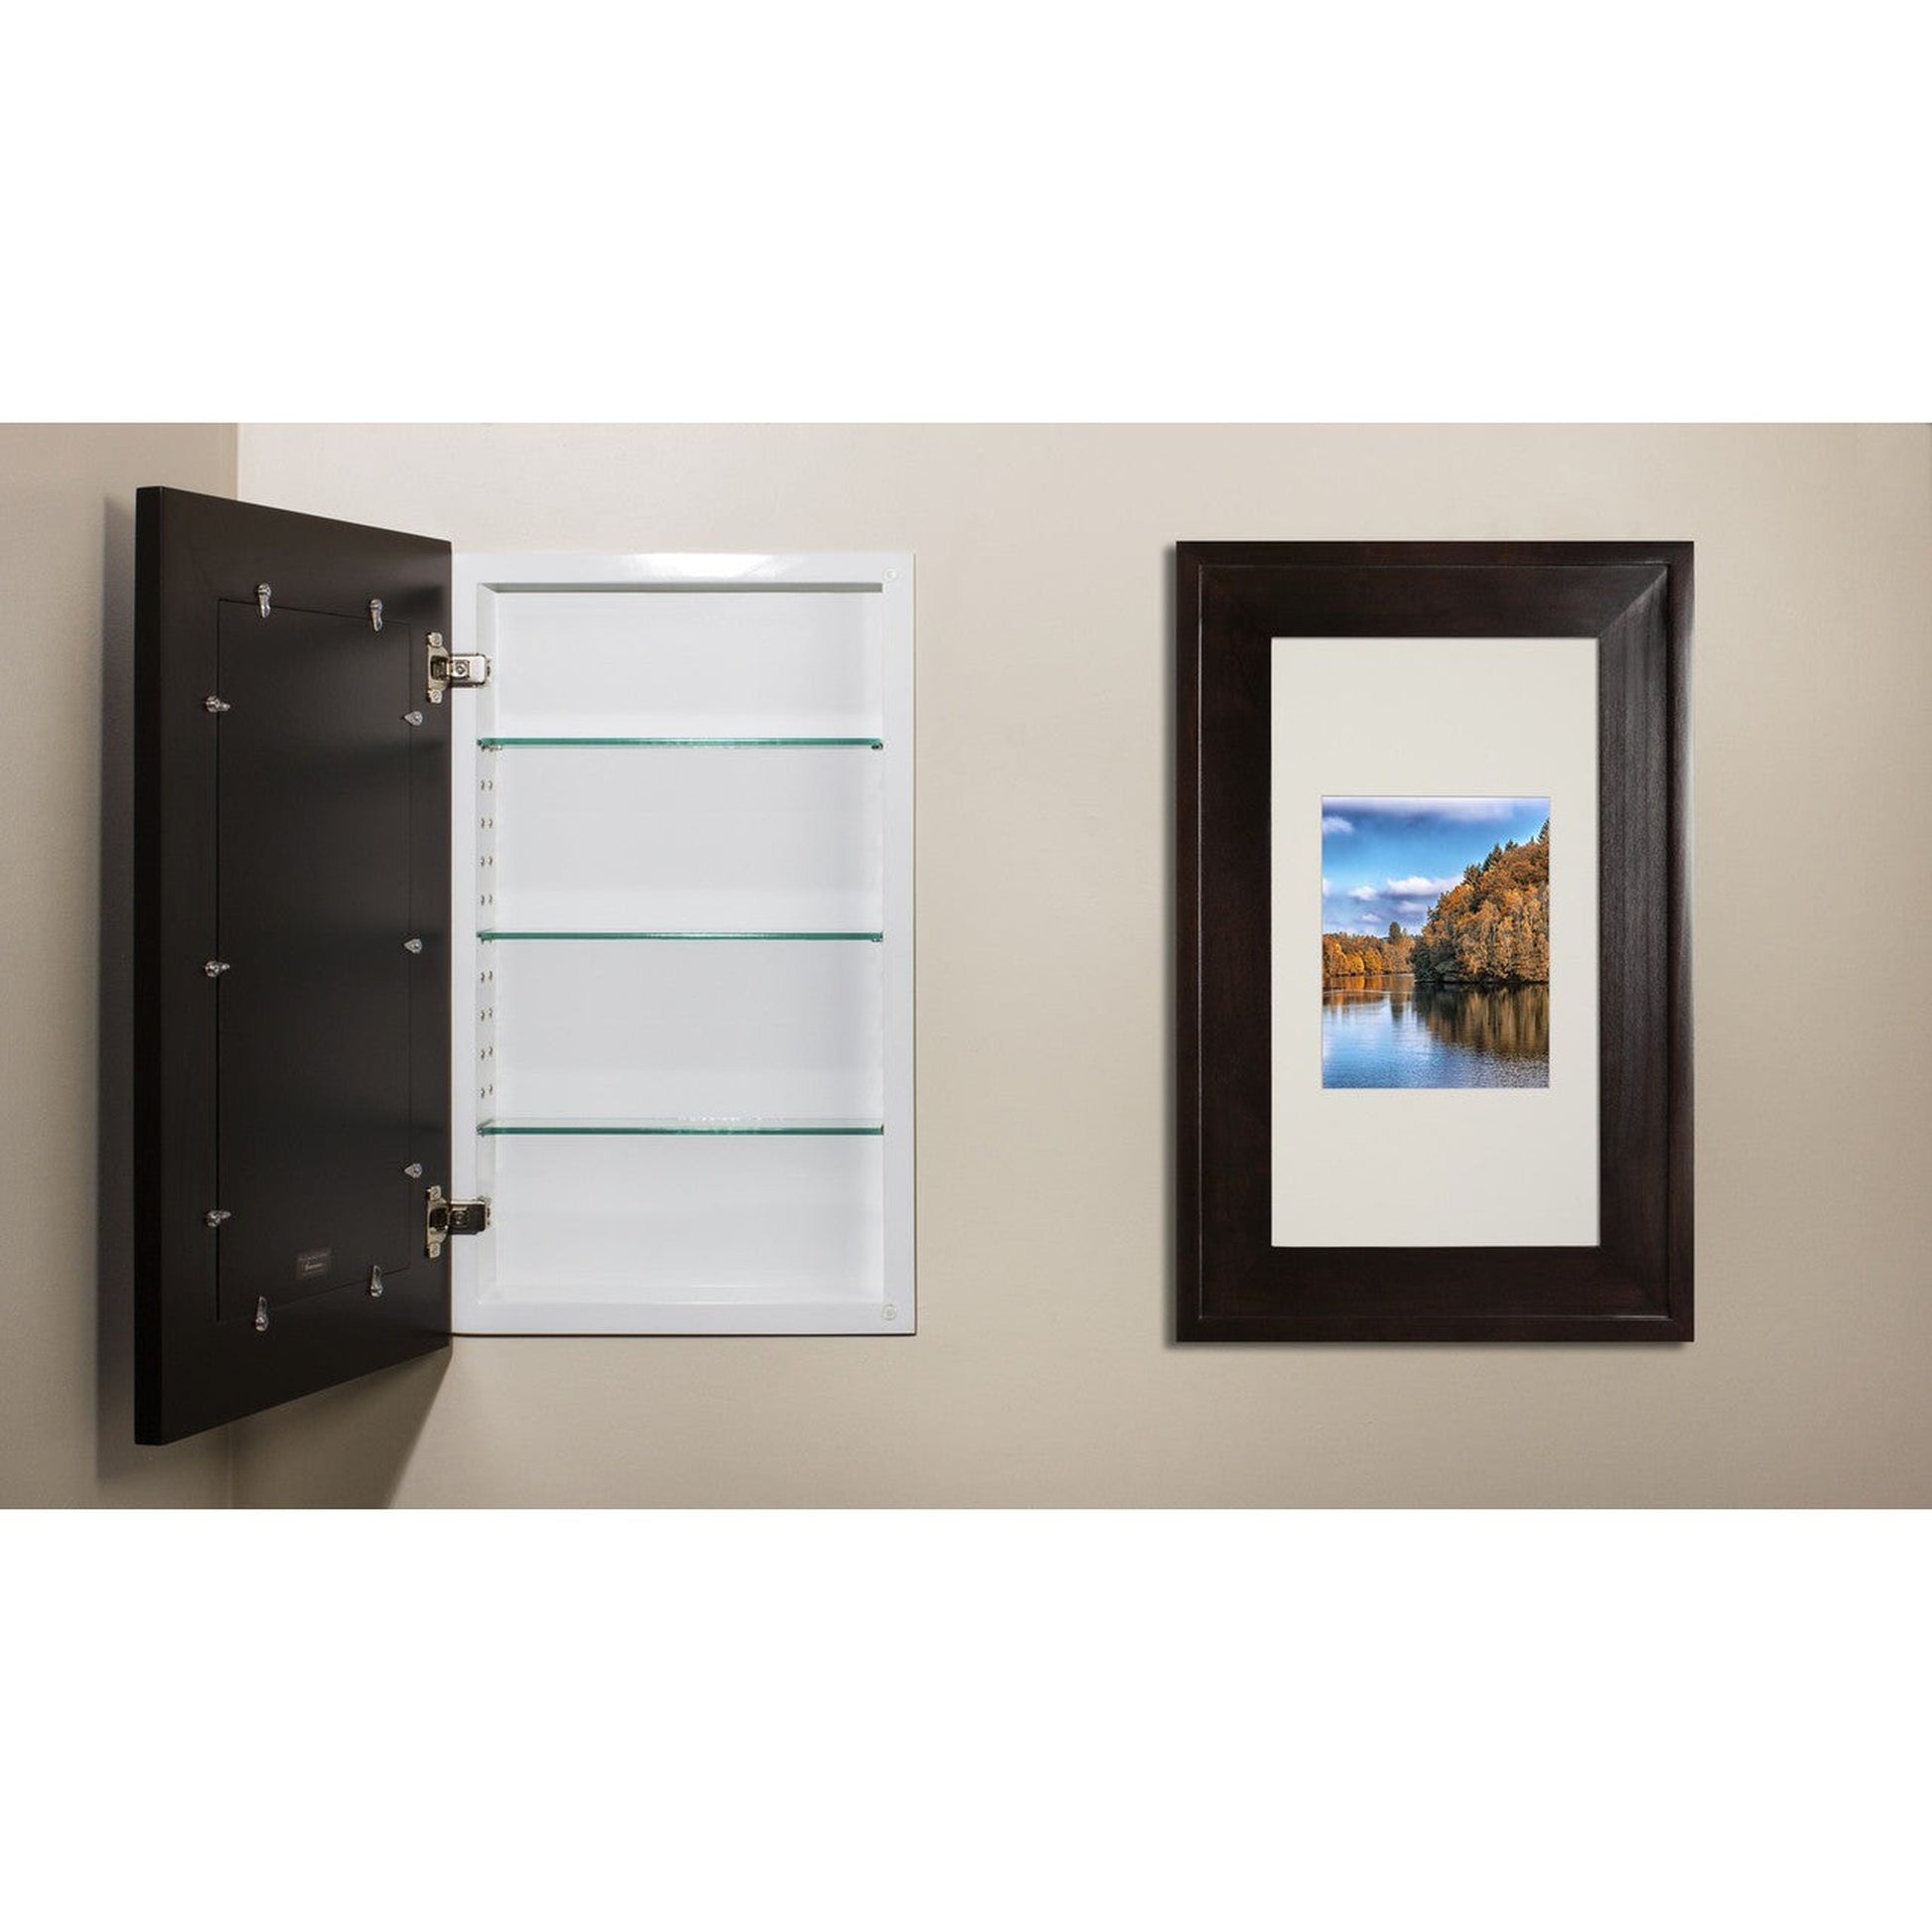 Fox Hollow Furnishings 14" x 24" Coffee Bean Extra Large White Interior Special 3" Depth Recessed Picture Frame Medicine Cabinet With Black Matting